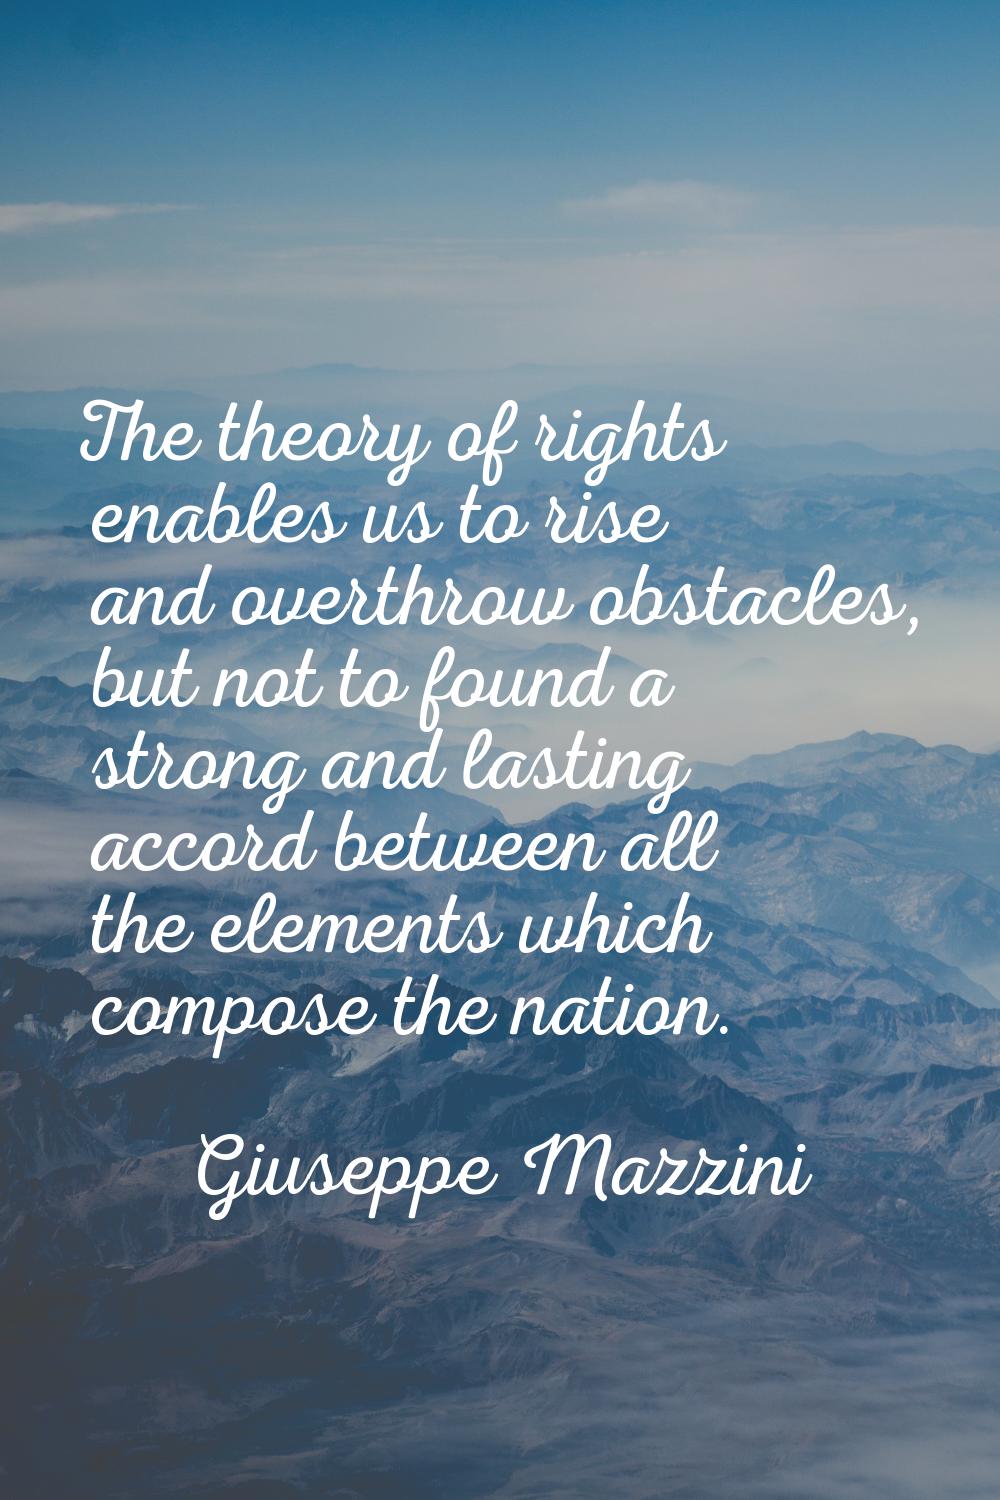 The theory of rights enables us to rise and overthrow obstacles, but not to found a strong and last